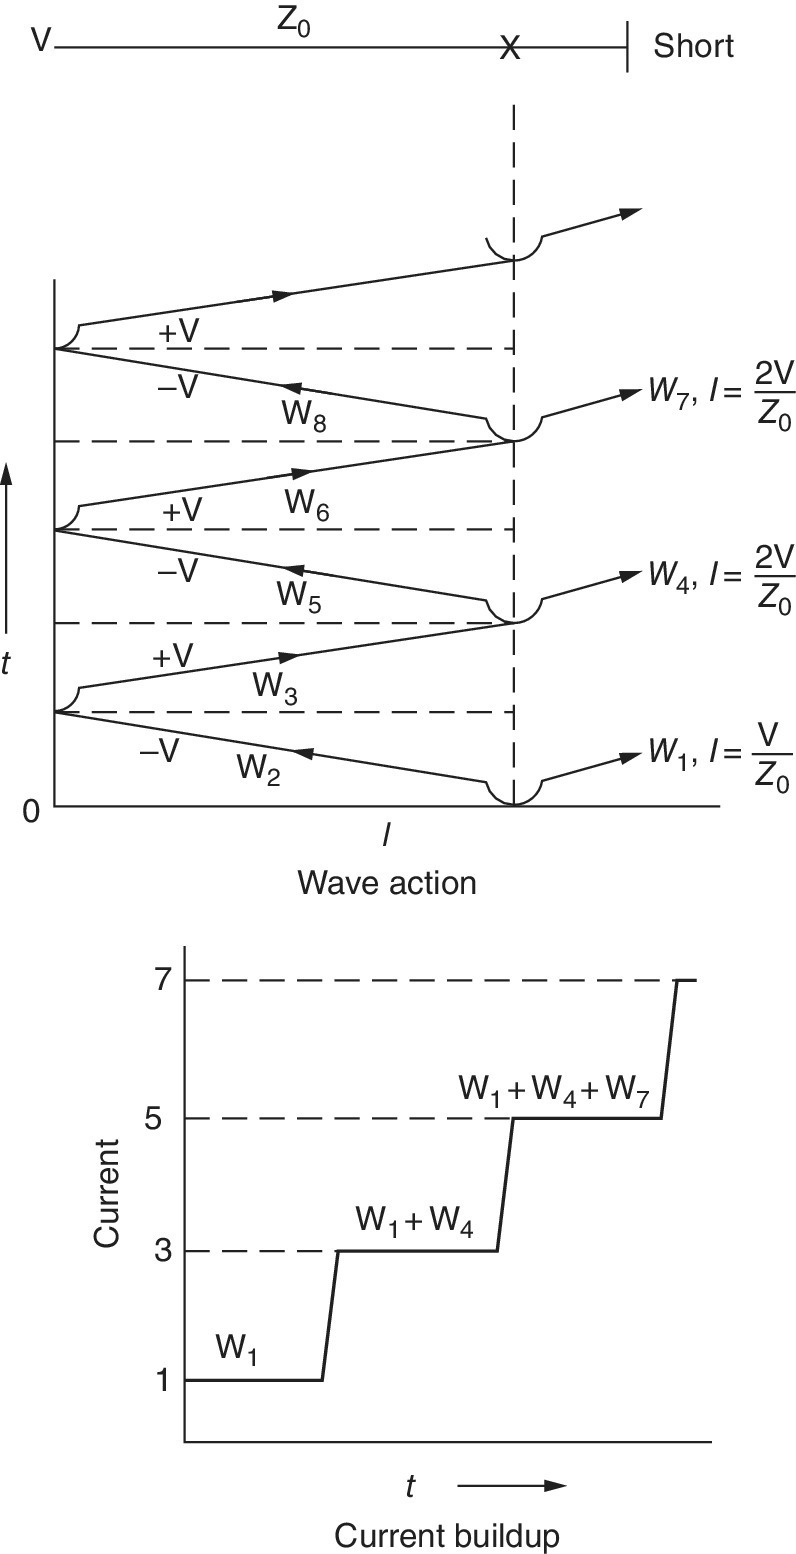 Graphs of t vs. I for wave action displaying interconnected arrows with heads pointing rightward (top) and current vs. t for current build up displaying an ascending staircase line labeled W1, W1+W4, etc. (bottom).